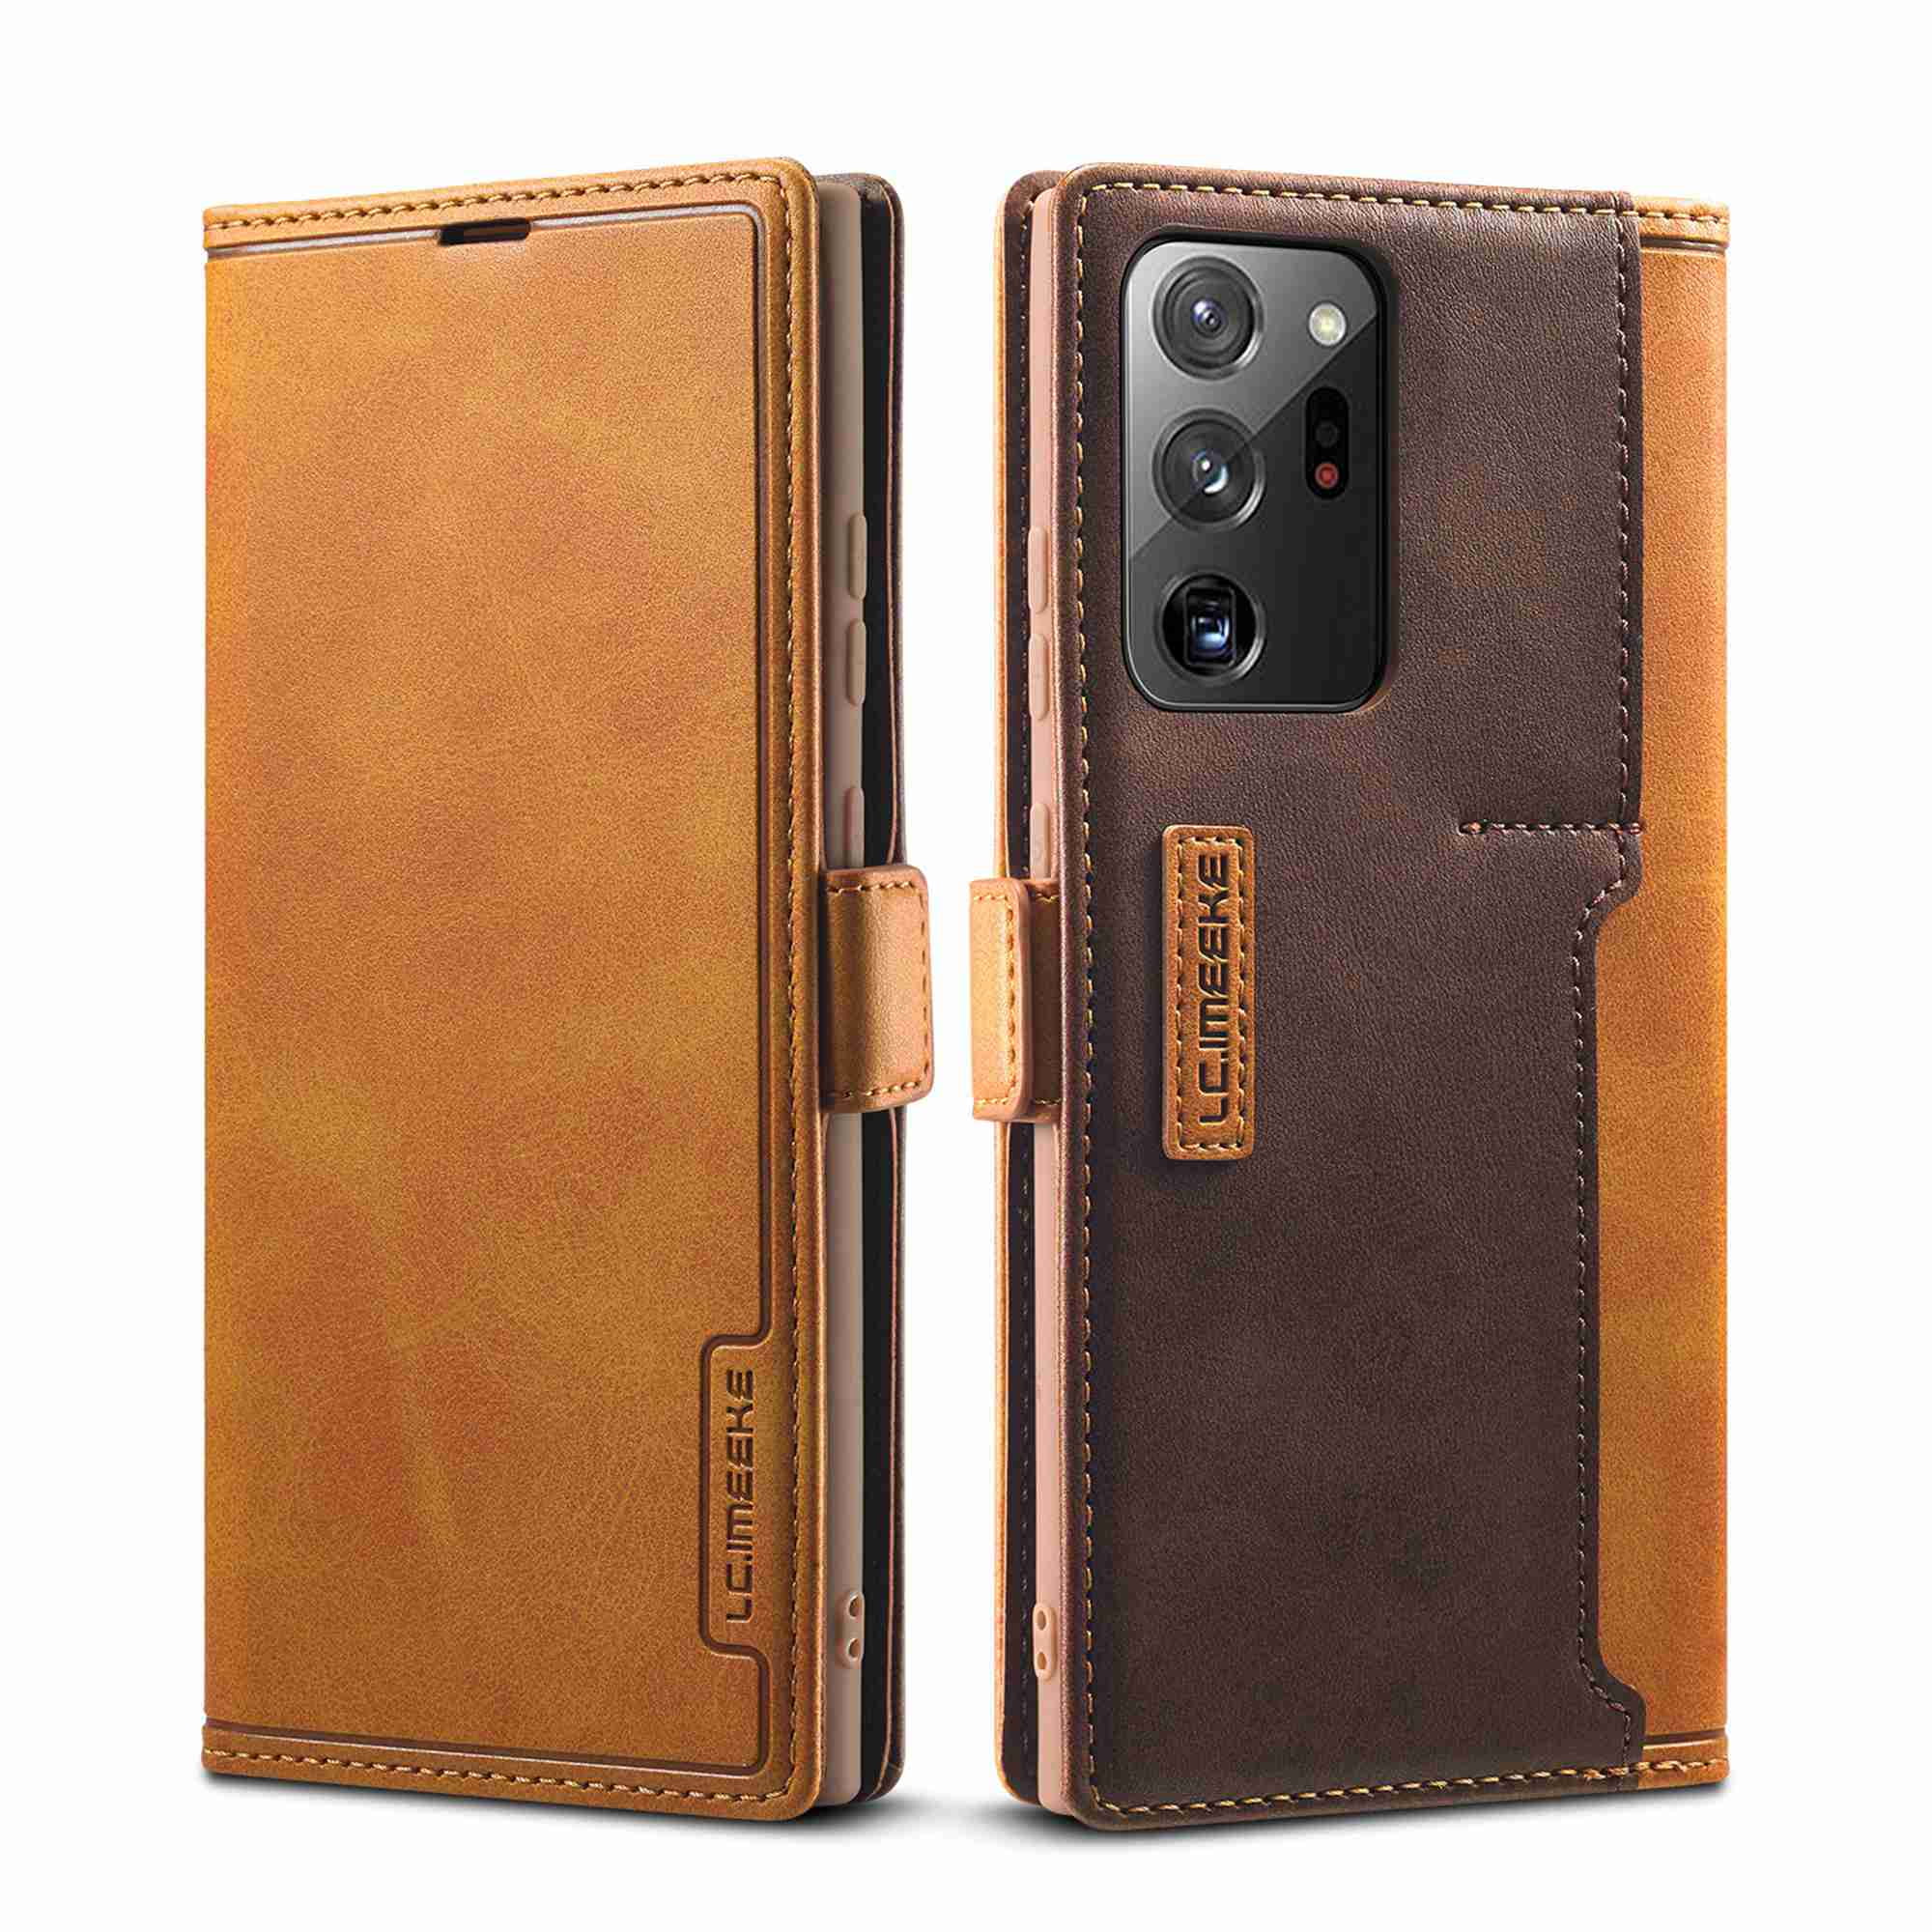 Dteck Case For Samsung Galaxy Note 20 Leather Wallet Case